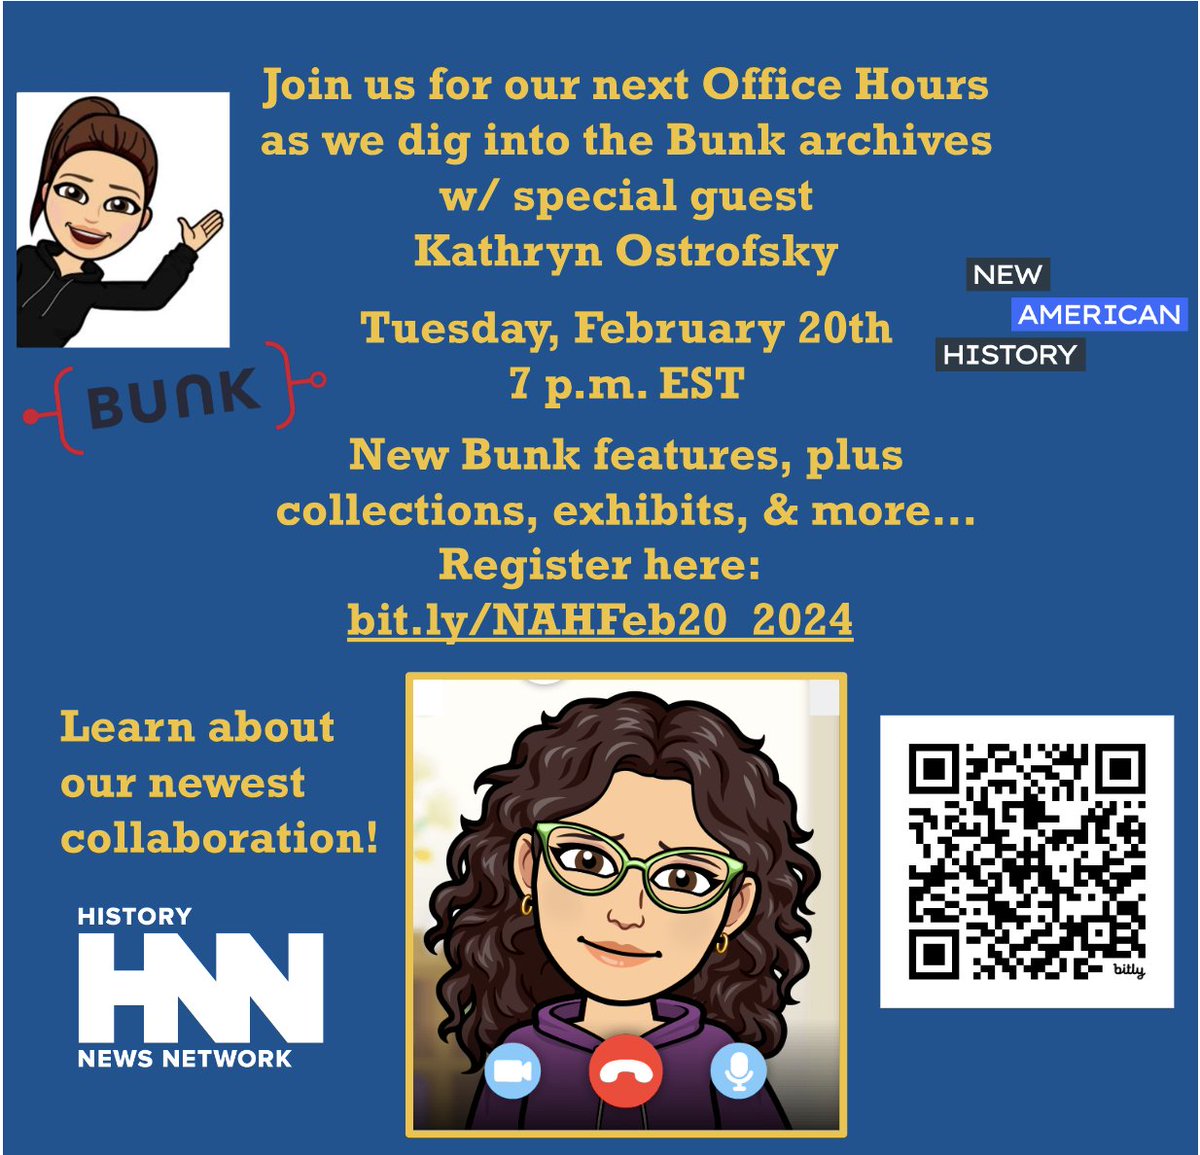 New American History Office Hours: Archives Edition! Join us Tuesday, February 20th at 7 pm EST when our Bunk Archivist, @K_Ostrofsky digs into the Bunk archives! Preregistration is required, bring ??s ... bit.ly/NAHFeb20_2024